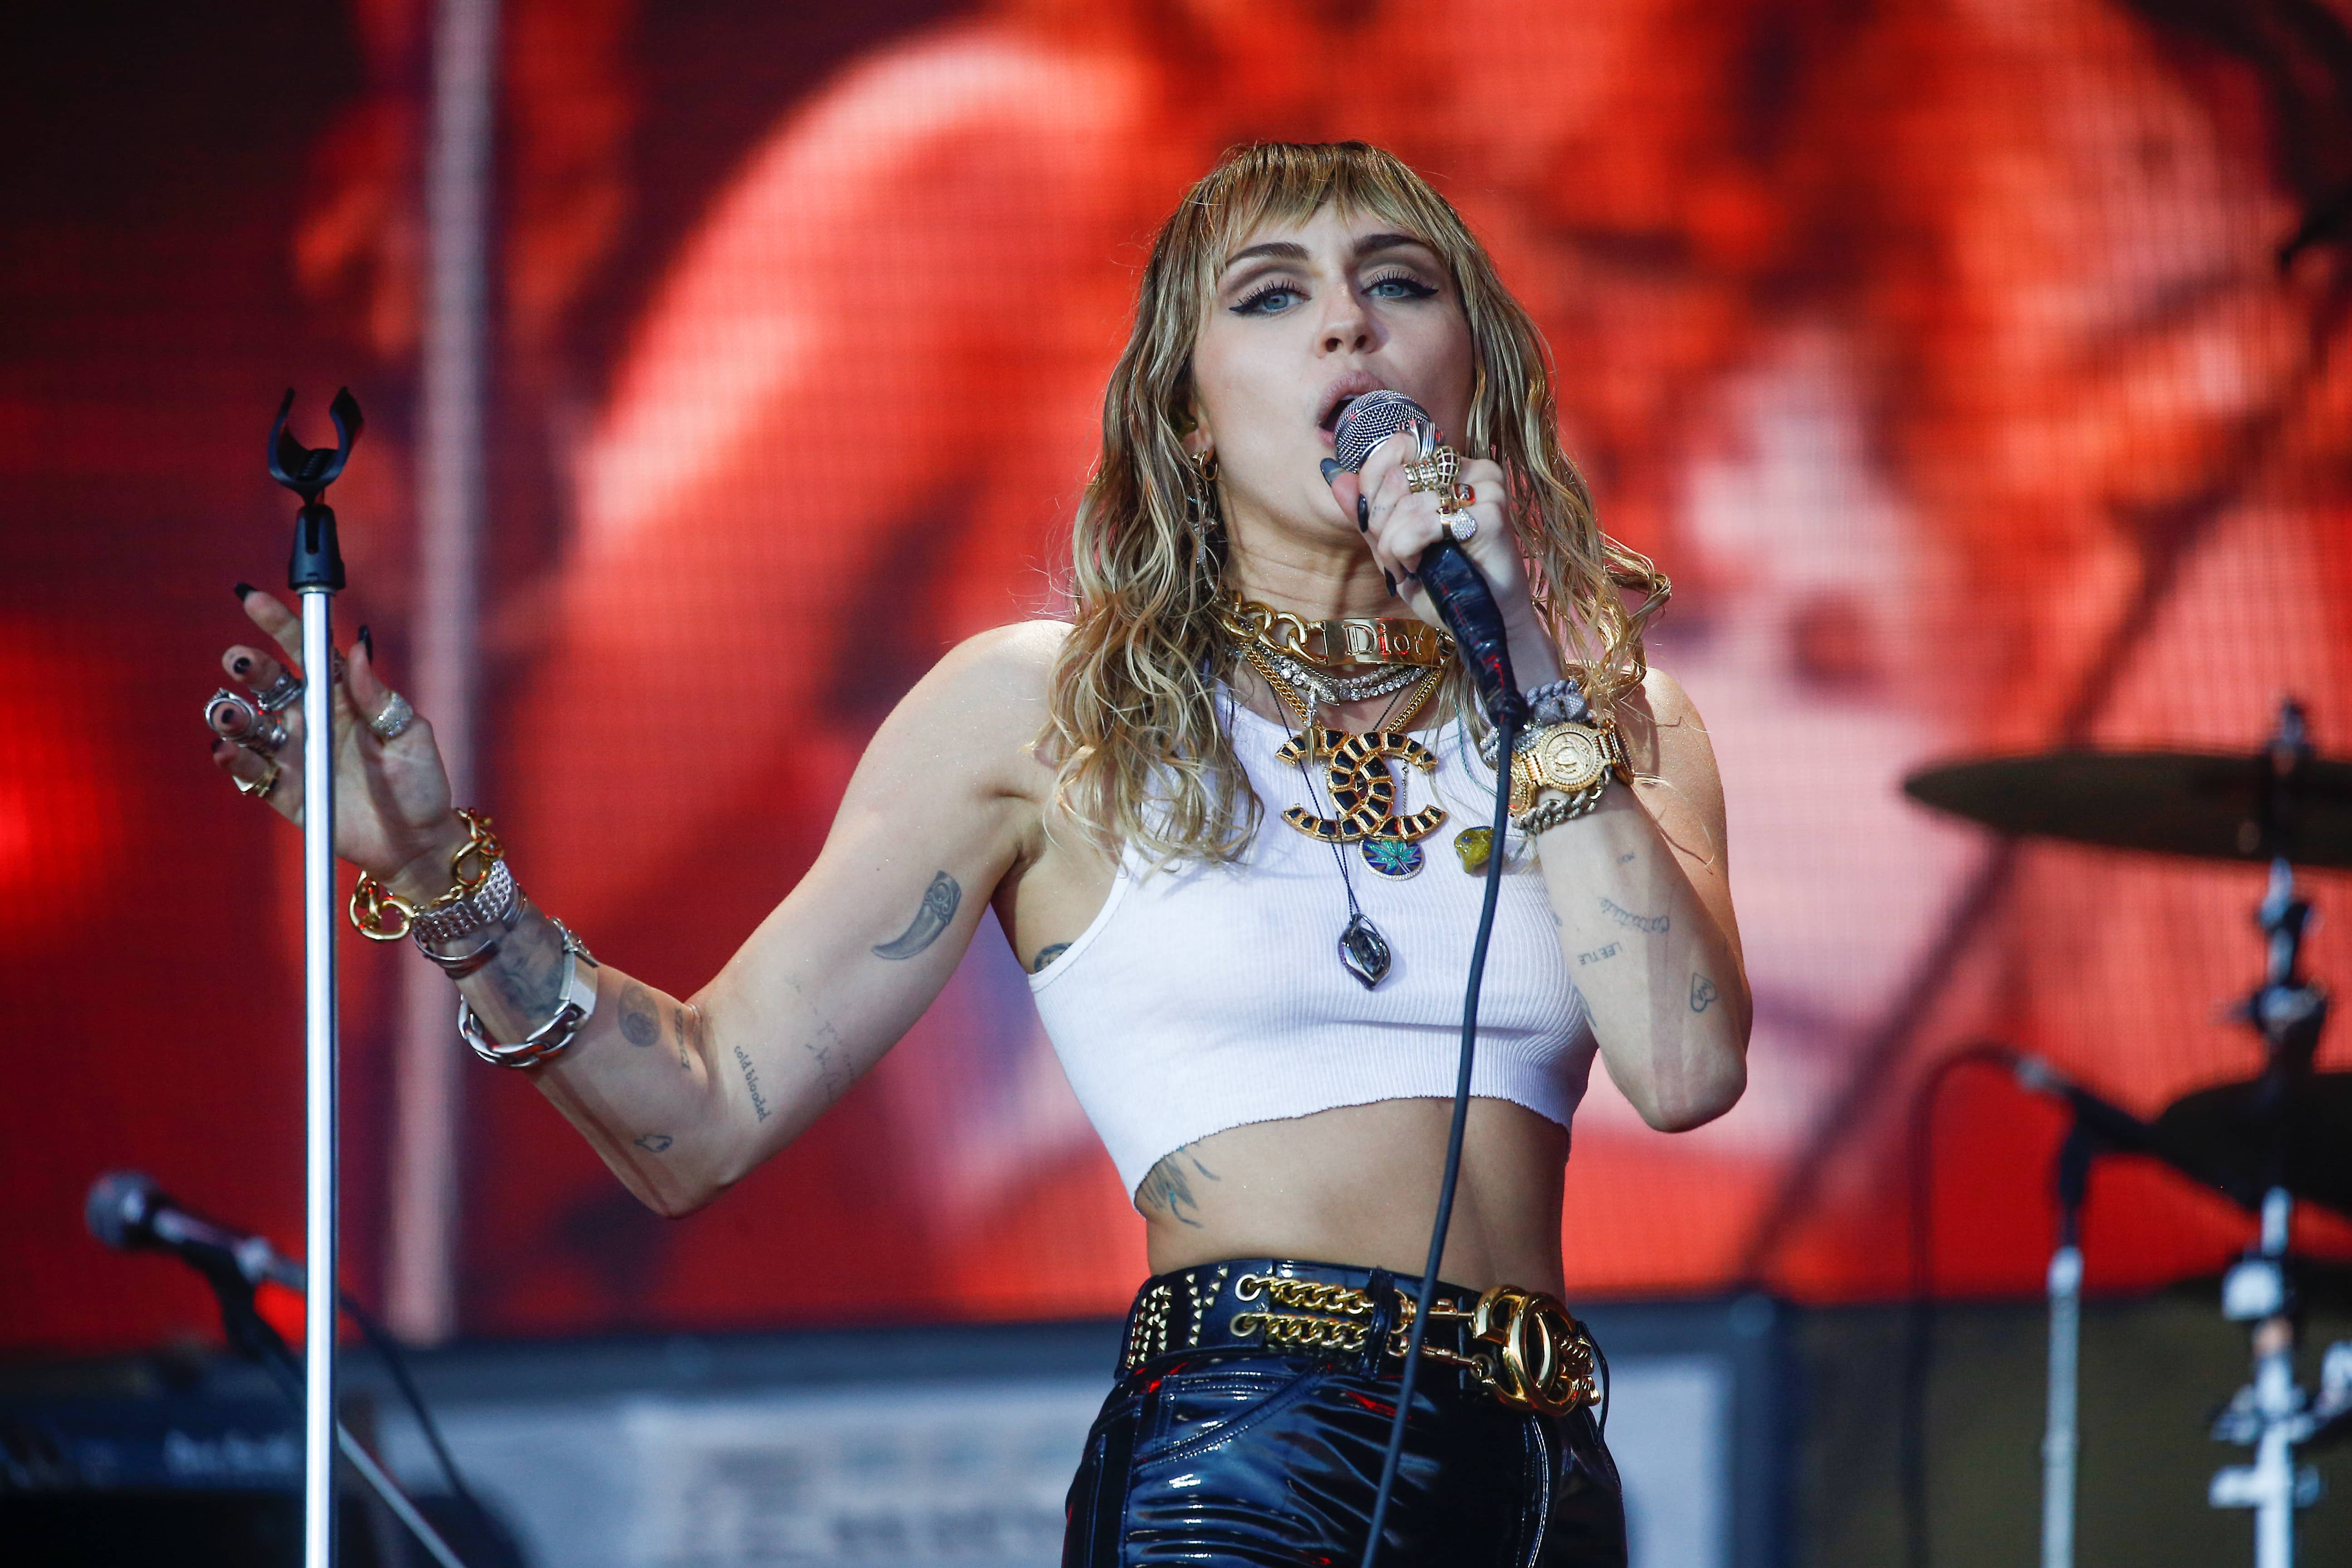 american-singer-miley-cyrus-performs-on-the-pyramid-stage-during-glastonbury-festival-in-somerset